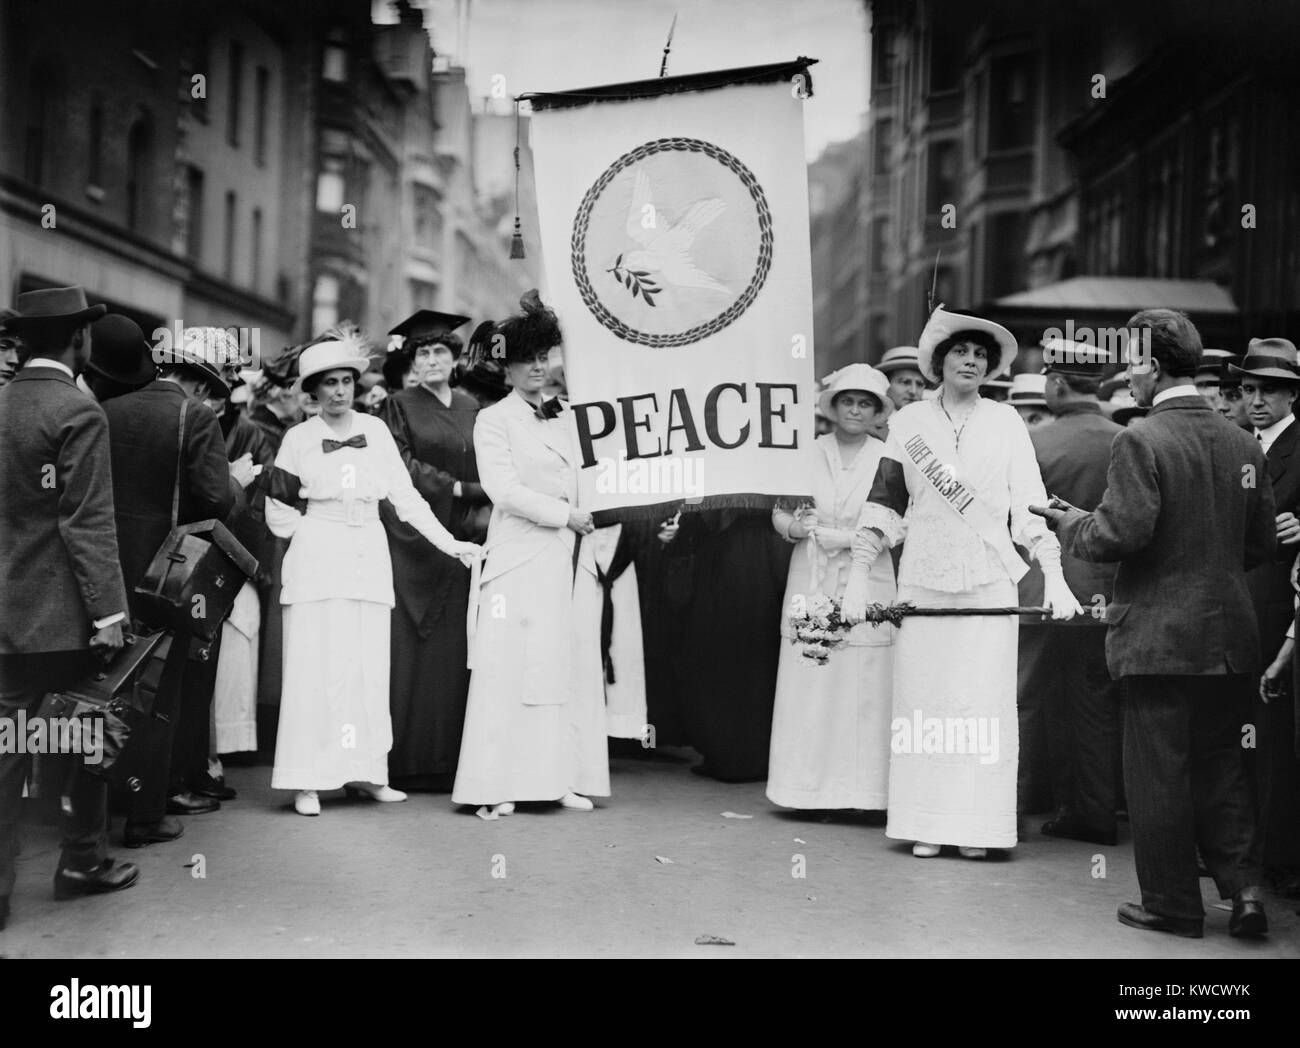 American womens peace parade in New York City, shortly after the start of World War I. On Aug. 29, 1914, they marched down Fifth Avenue, led by Chief Marshal Portia Willis FitzGerald (on right), called Prettiest Suffragette in New York State (BSLOC 2017 1 63) Stock Photo